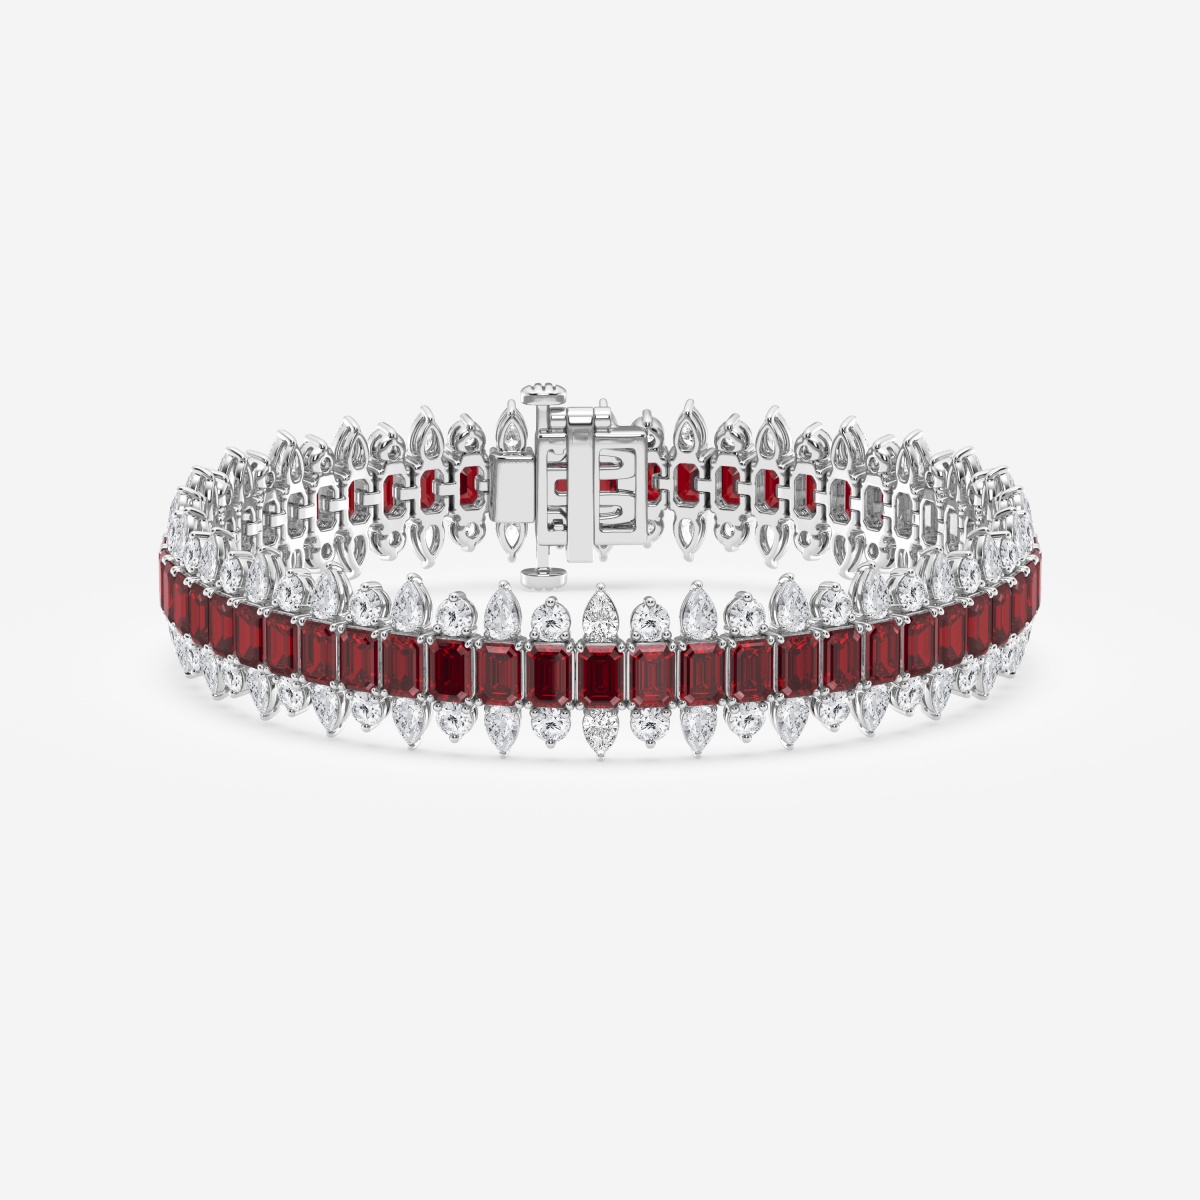 4.1x2.9 mm Emerald Cut Created Ruby and 5 1/2 ctw Round and Pear Lab Grown Diamond Fashion Bracelet - 7 Inches